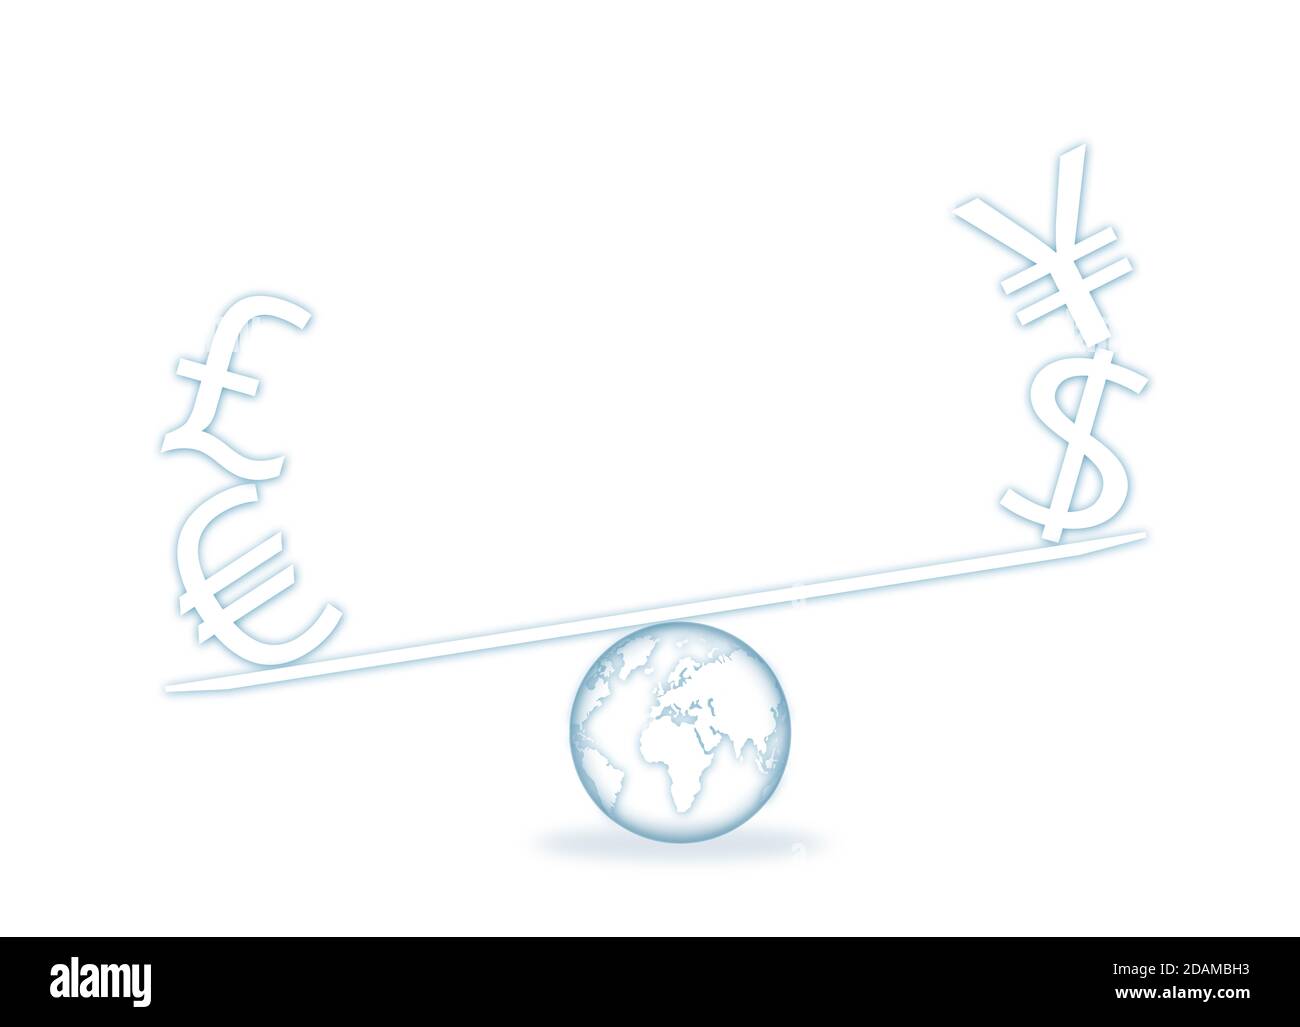 Scales with currency symbols, illustration. Stock Photo